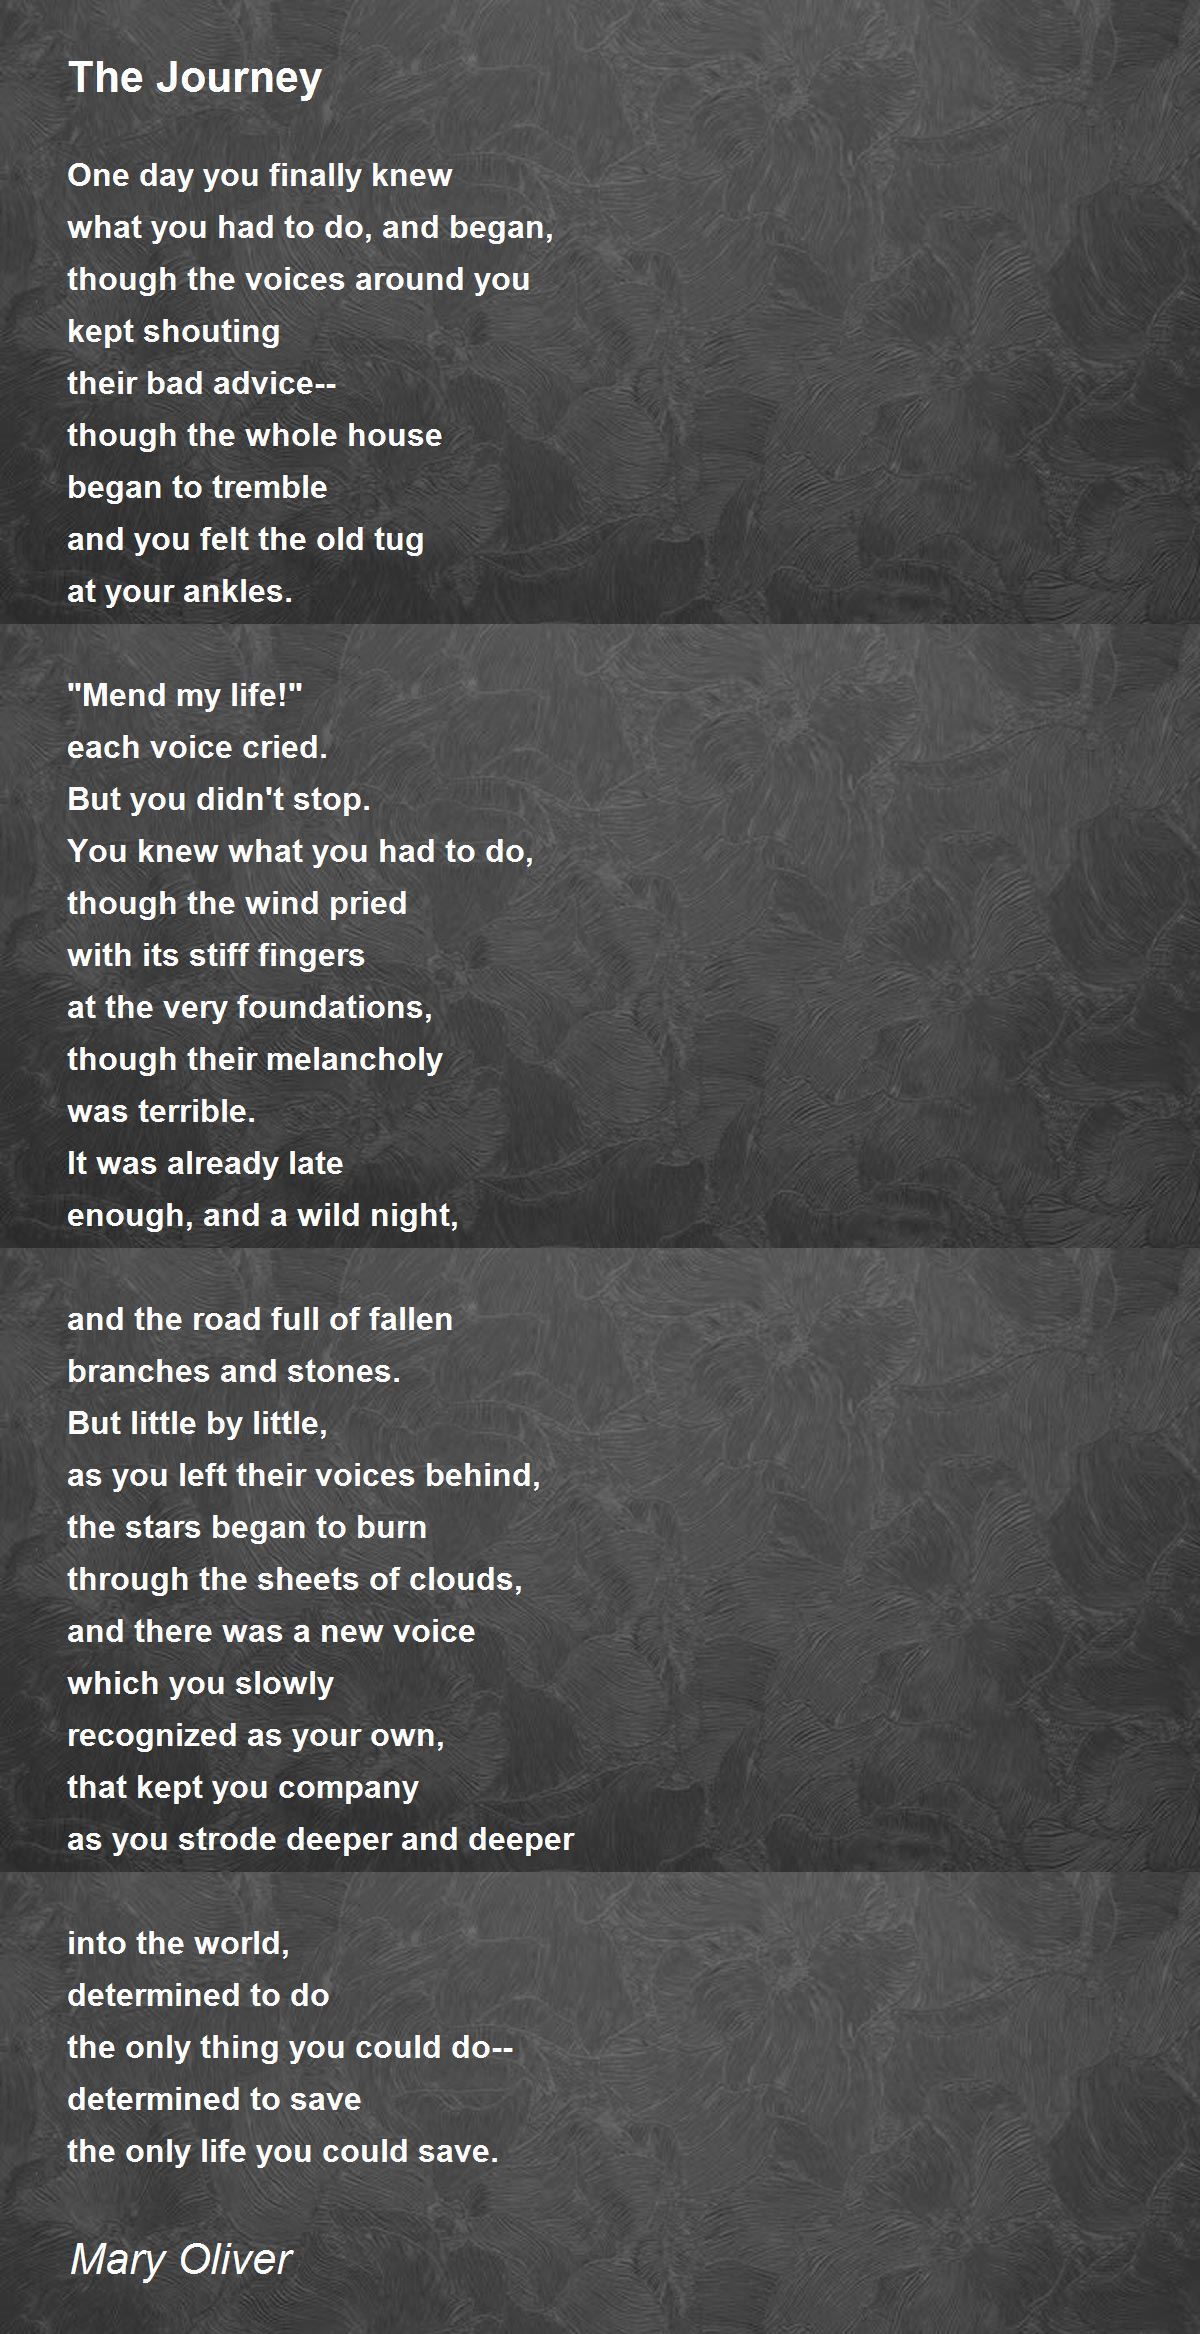 The Journey Poem by Mary Oliver - Poem Hunter Comments